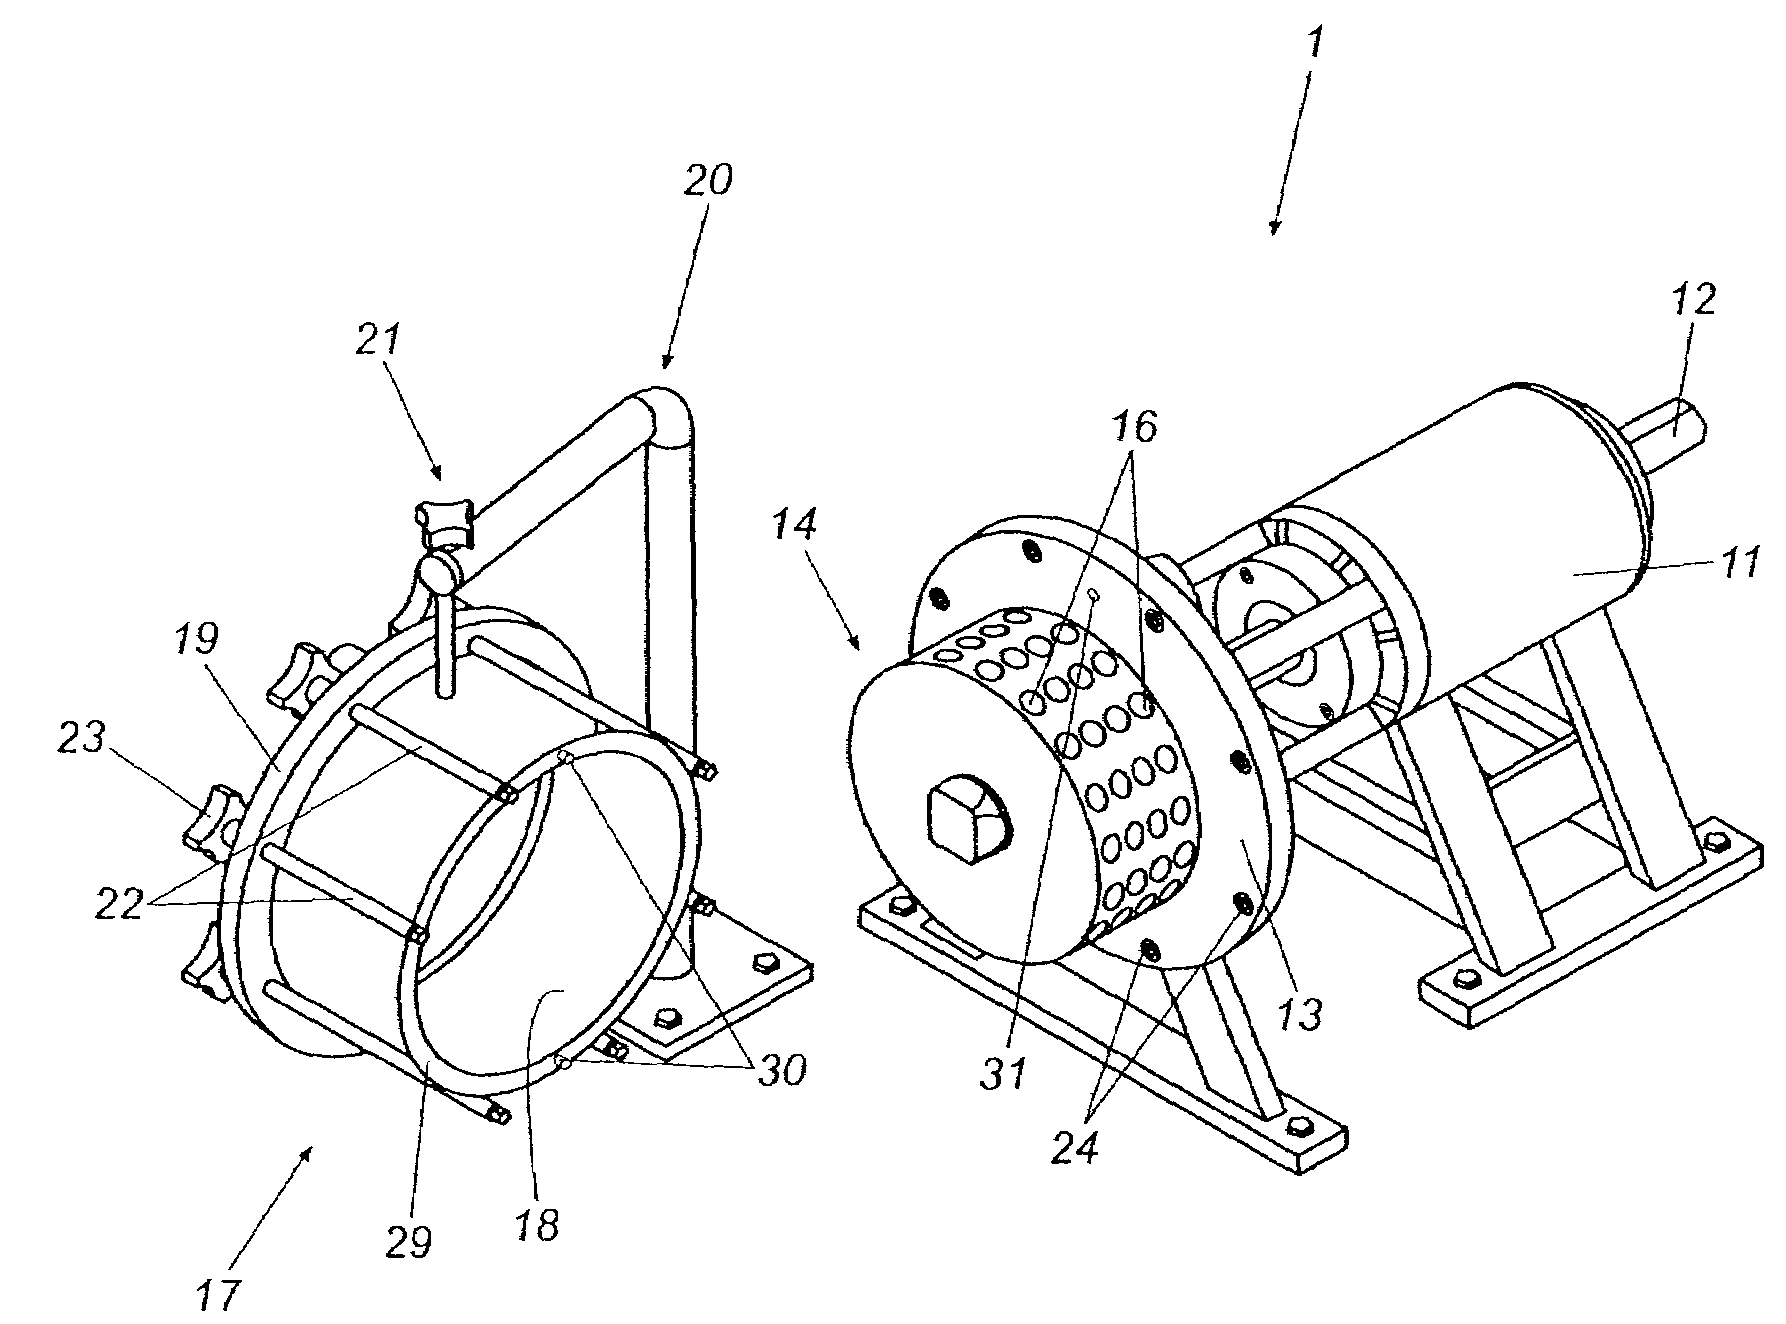 Controlled cavitation device with easy disassembly and cleaning